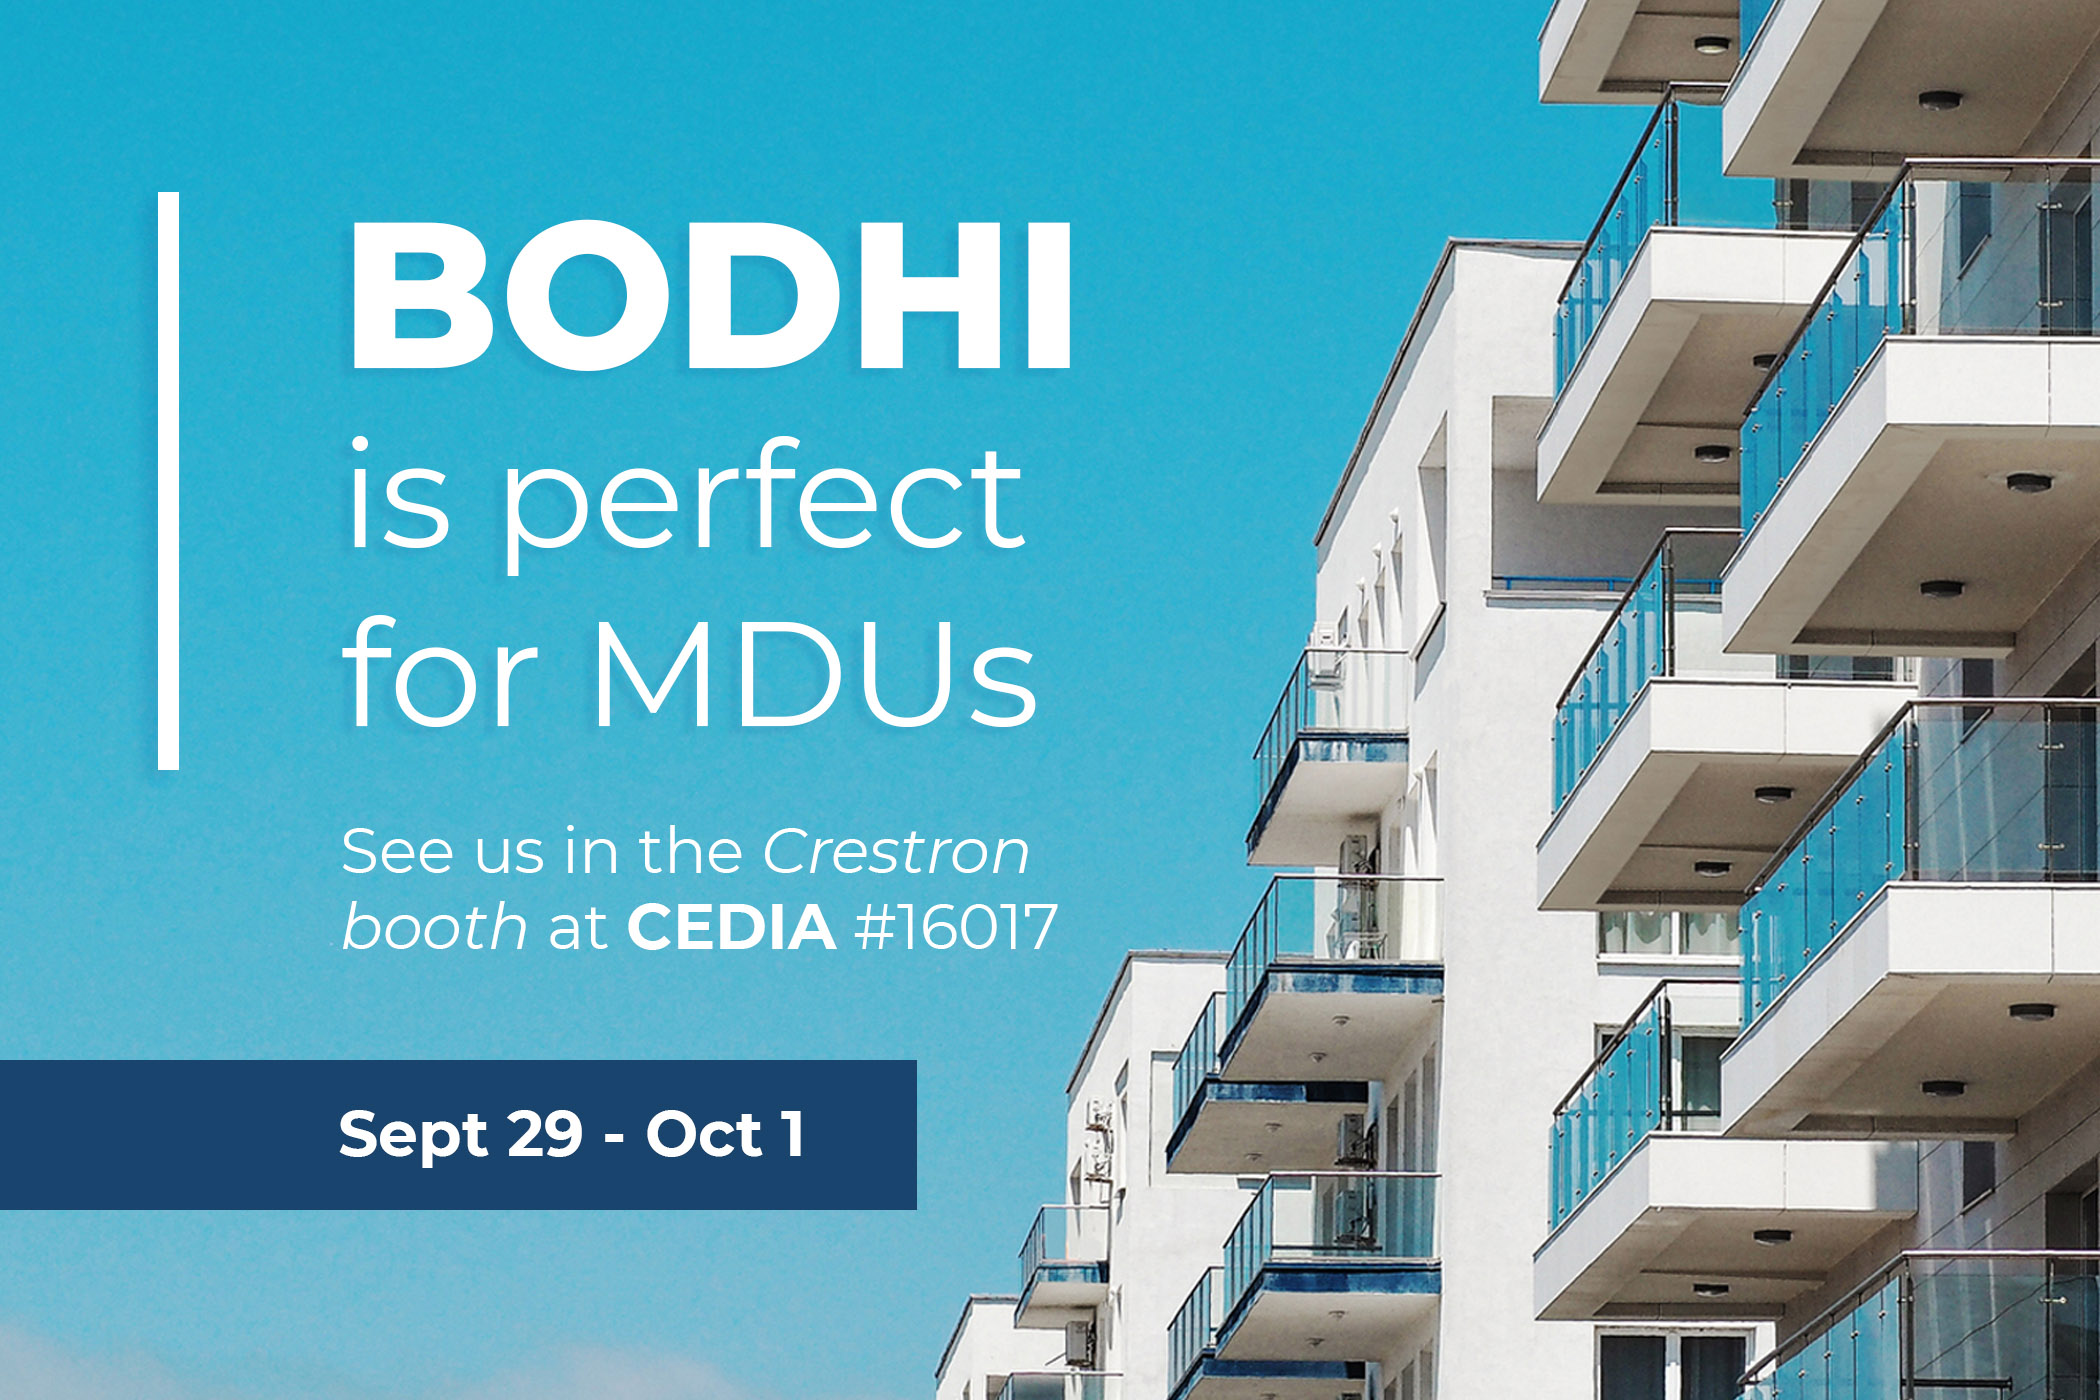 Bodhi is perfect for MDUs. See us in the Crestron booth at CEDIA #16017